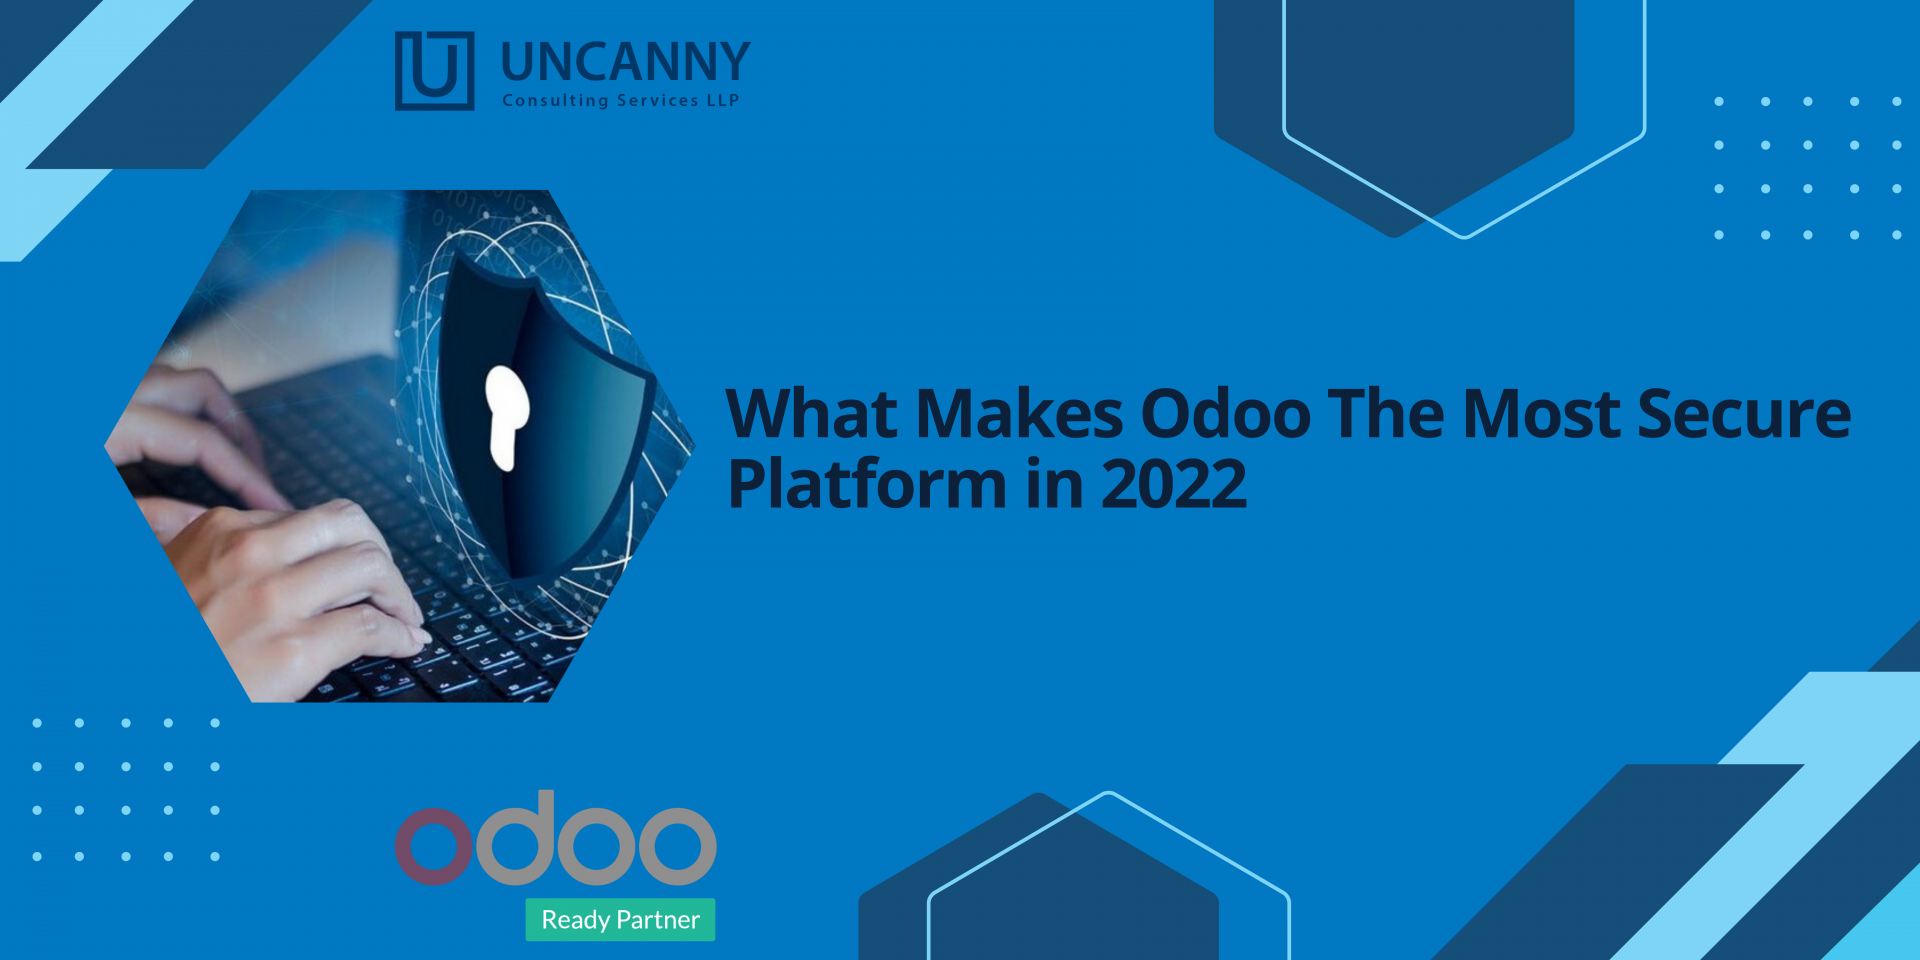 What Makes Odoo The Most Secure Platform in 2022